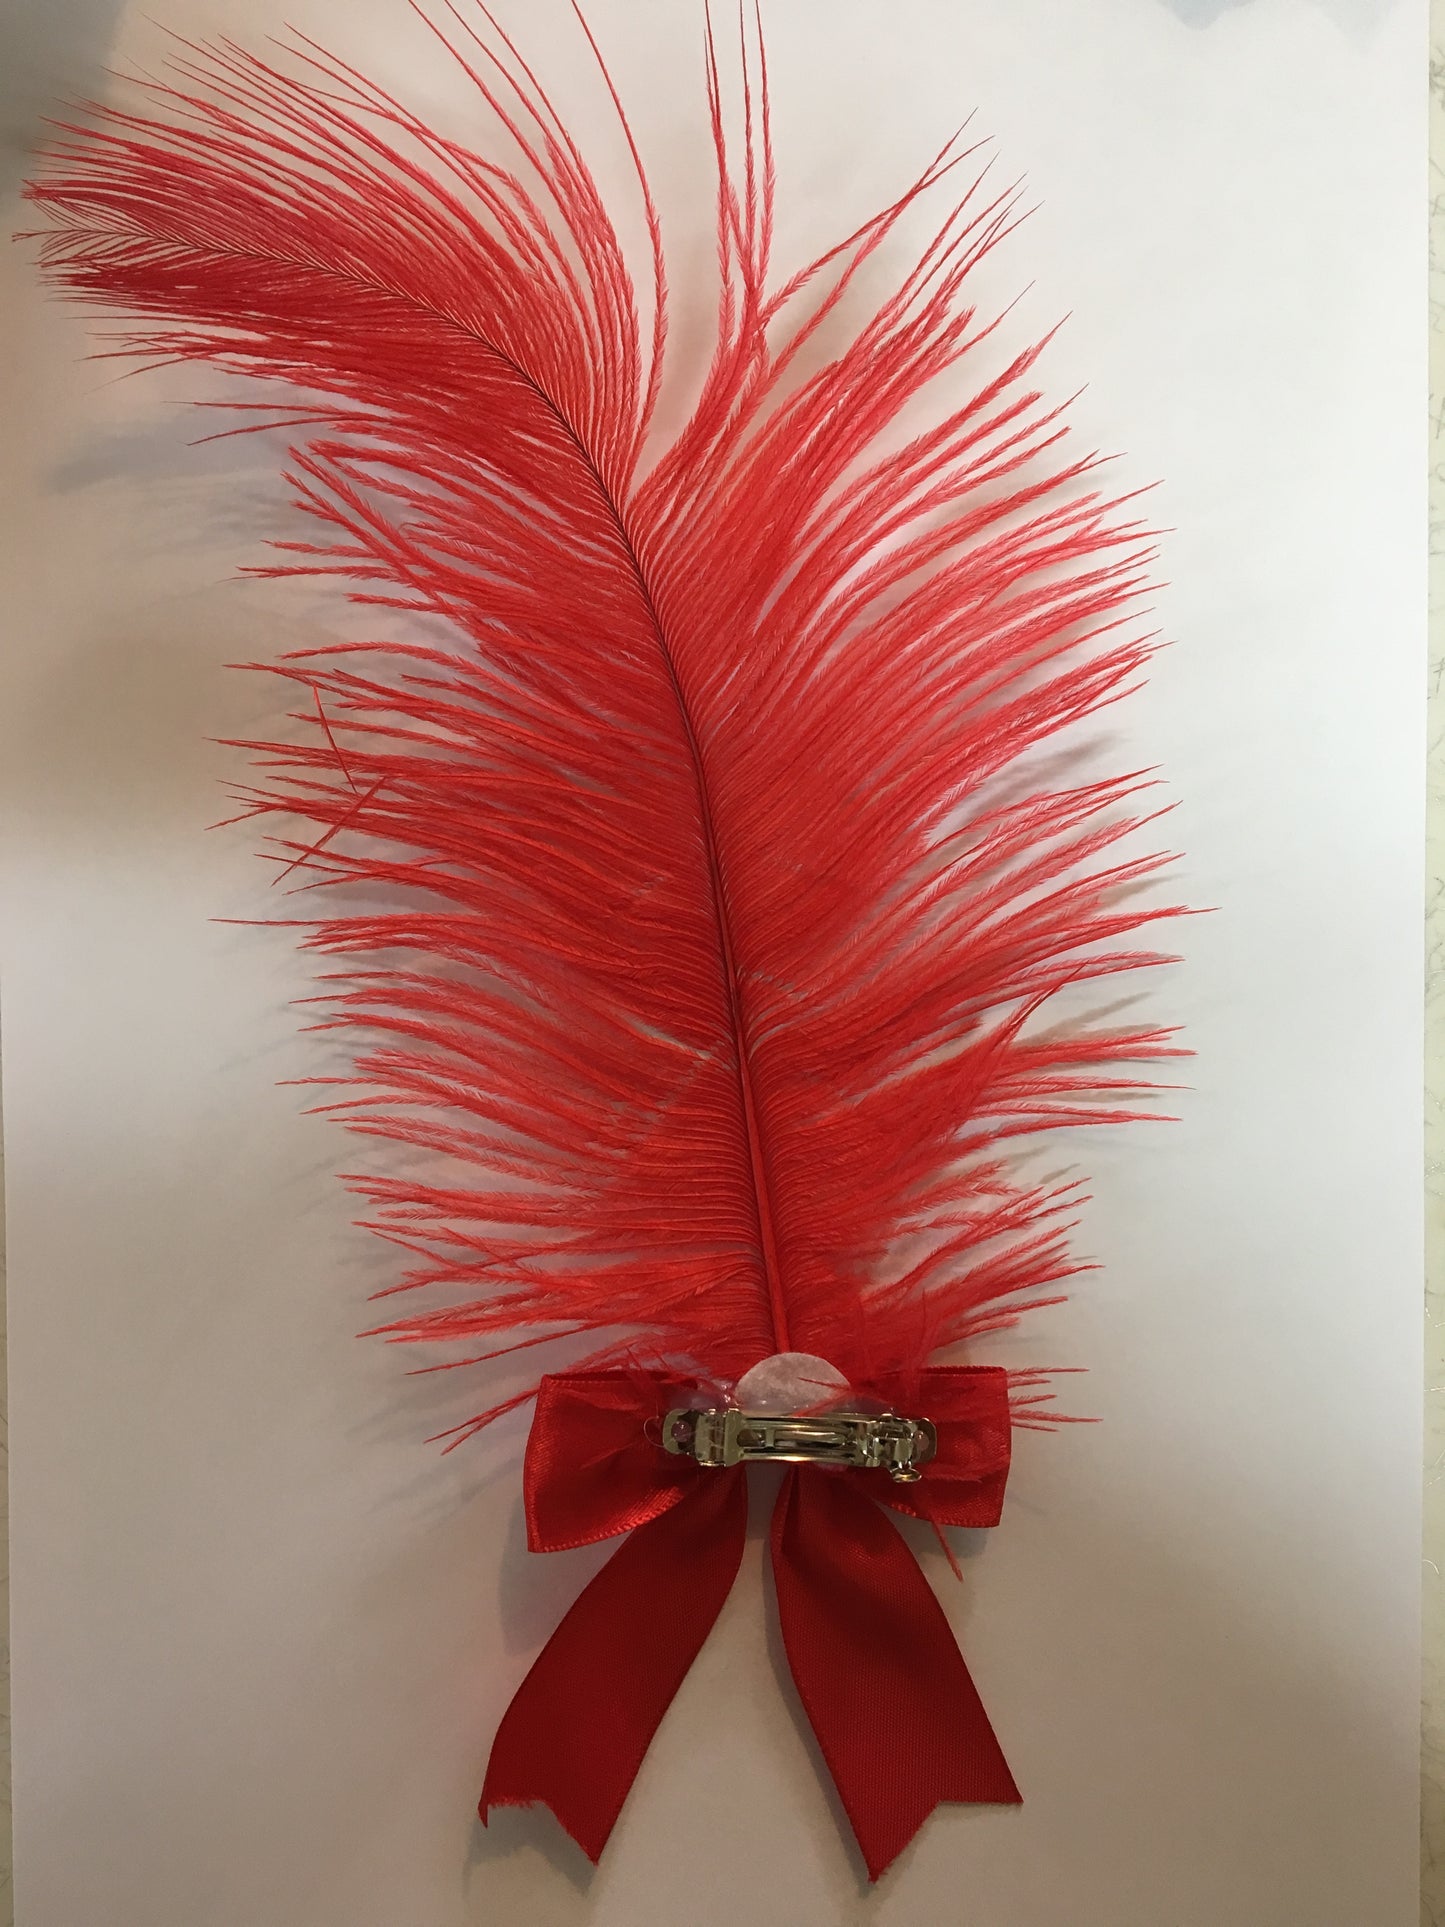 Red Feathered Hair Clip